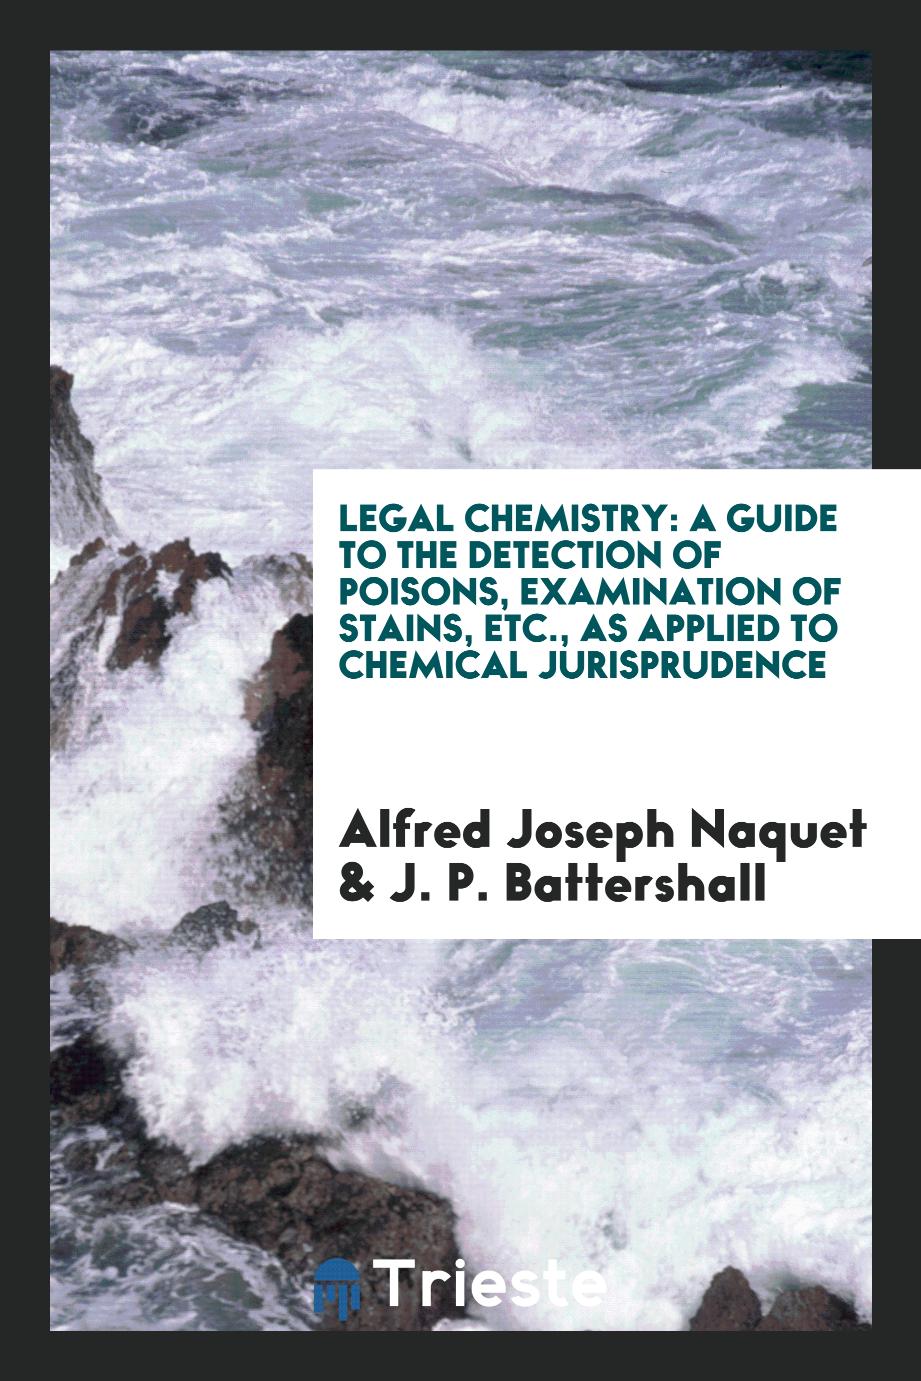 Legal chemistry: A Guide to the Detection of Poisons, Examination of Stains, Etc., as Applied to Chemical Jurisprudence